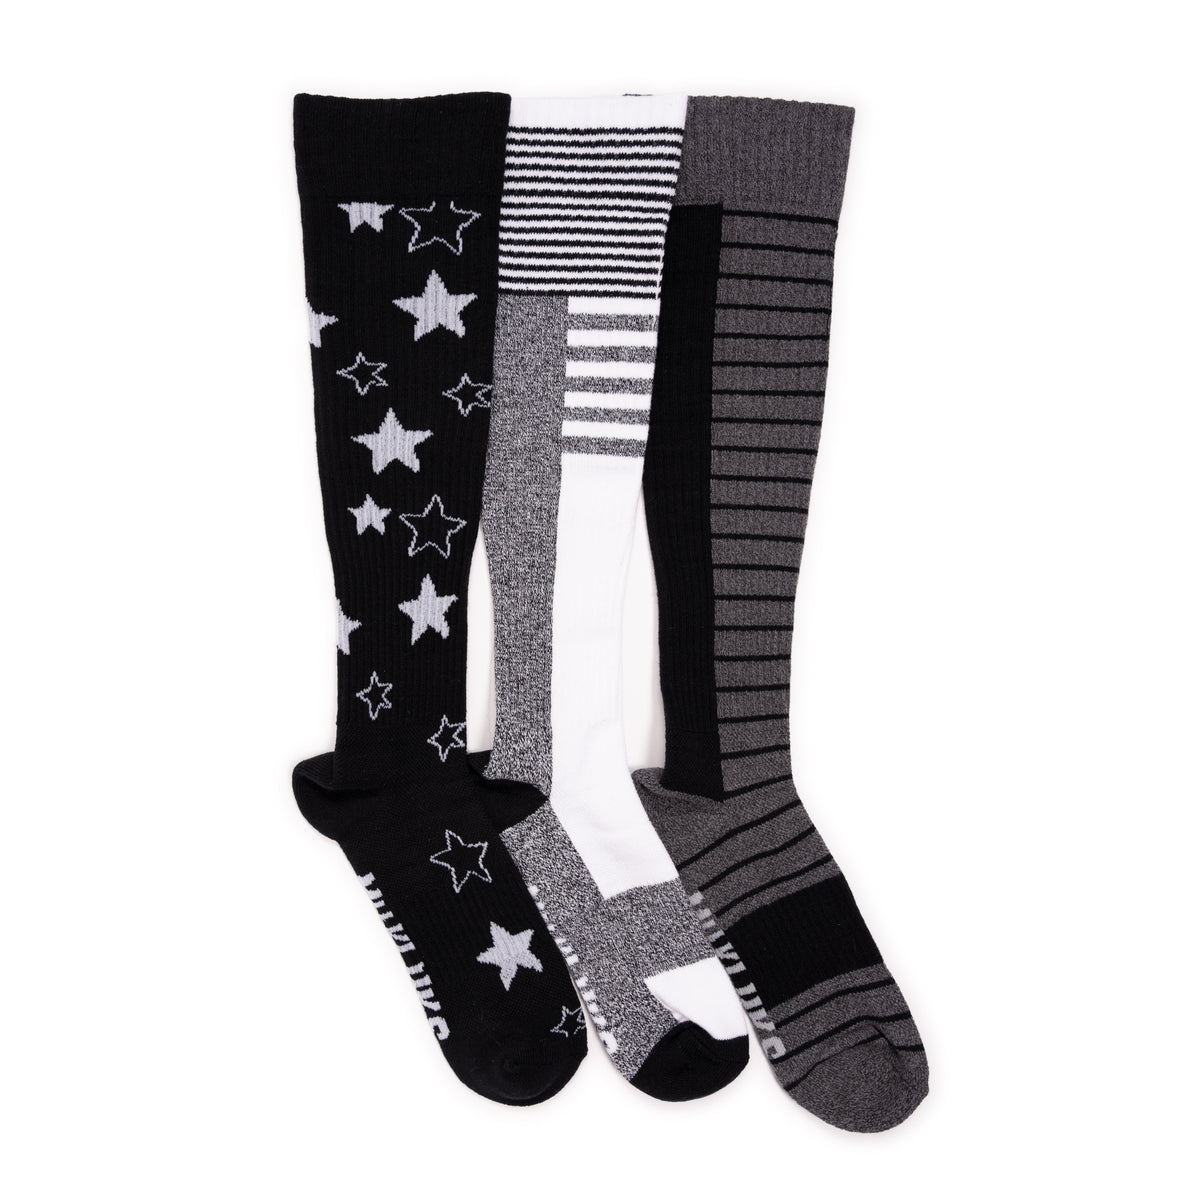 Wholesale Pure Cotton Kickboxing Socks For Men And Women With NK Print,  Popular Weed Sockings From Dhgates88, $1.14